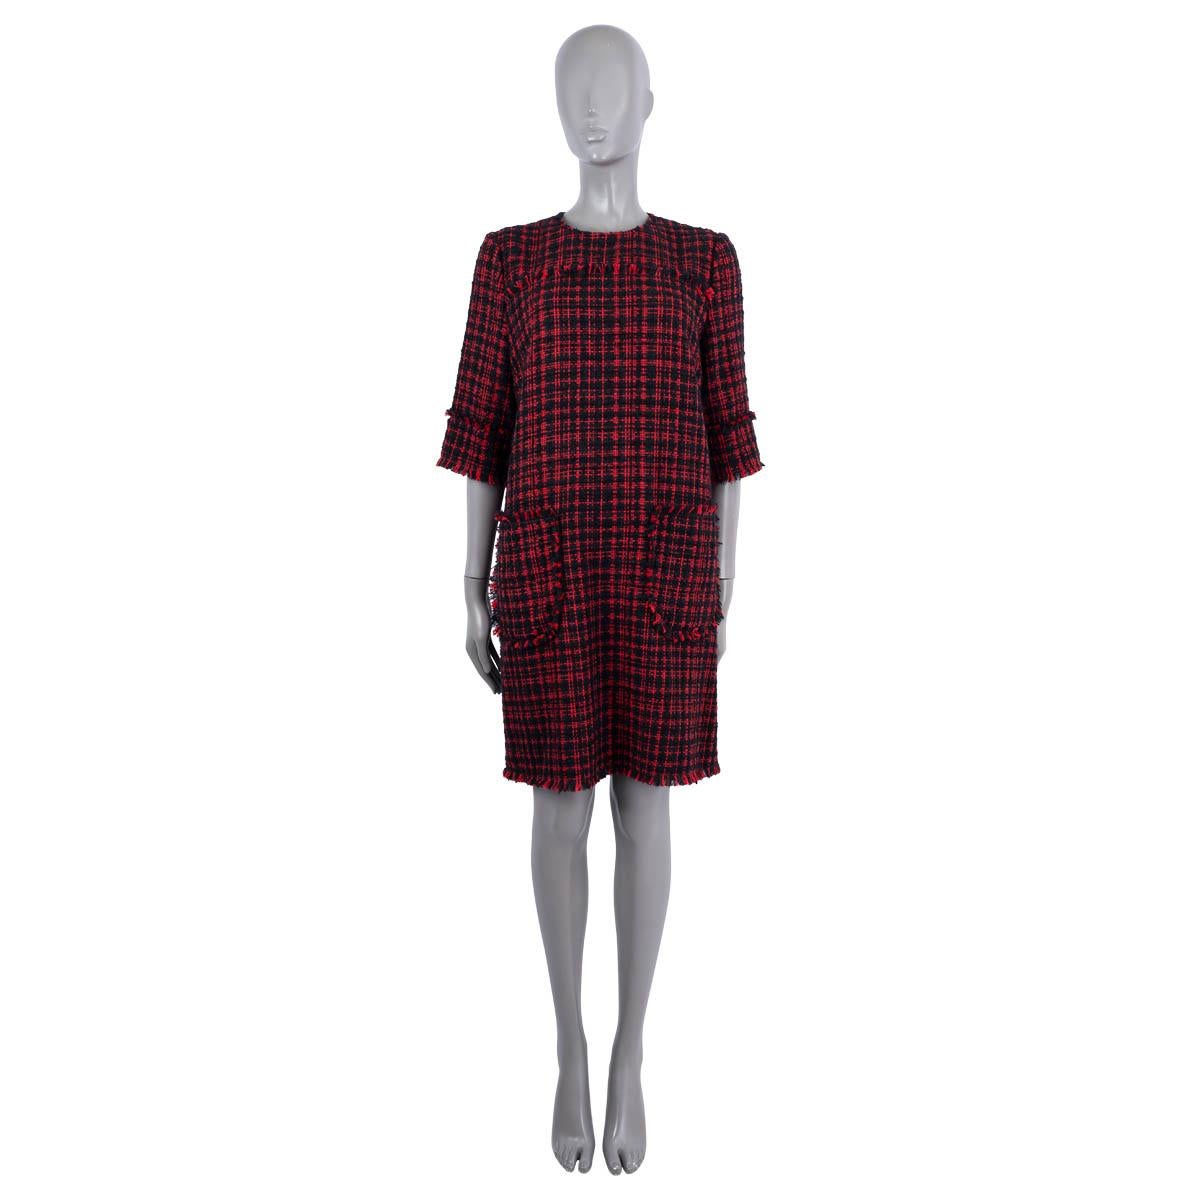 100% authentic Dolce & Gabbana short a-line dress in red and black tweed cotton (41%),  acrylic (21%), polyester (12%), alpaca (7%), mohair (7%), polyamide (6%), wool (6%). Features a crewneck, half sleeves and two front patch pockets with frayed